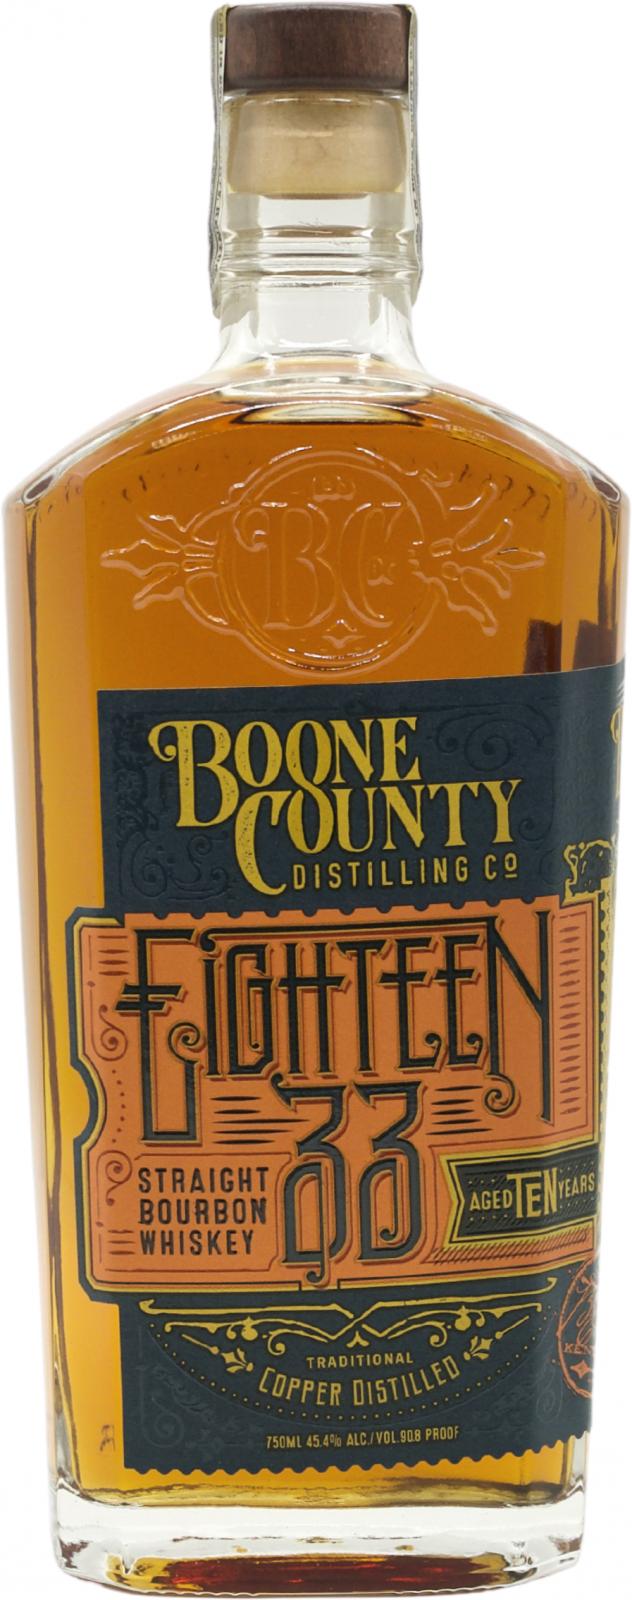 Boone County Eighteen 33 | 10 Year Old Bourbon Whiskey